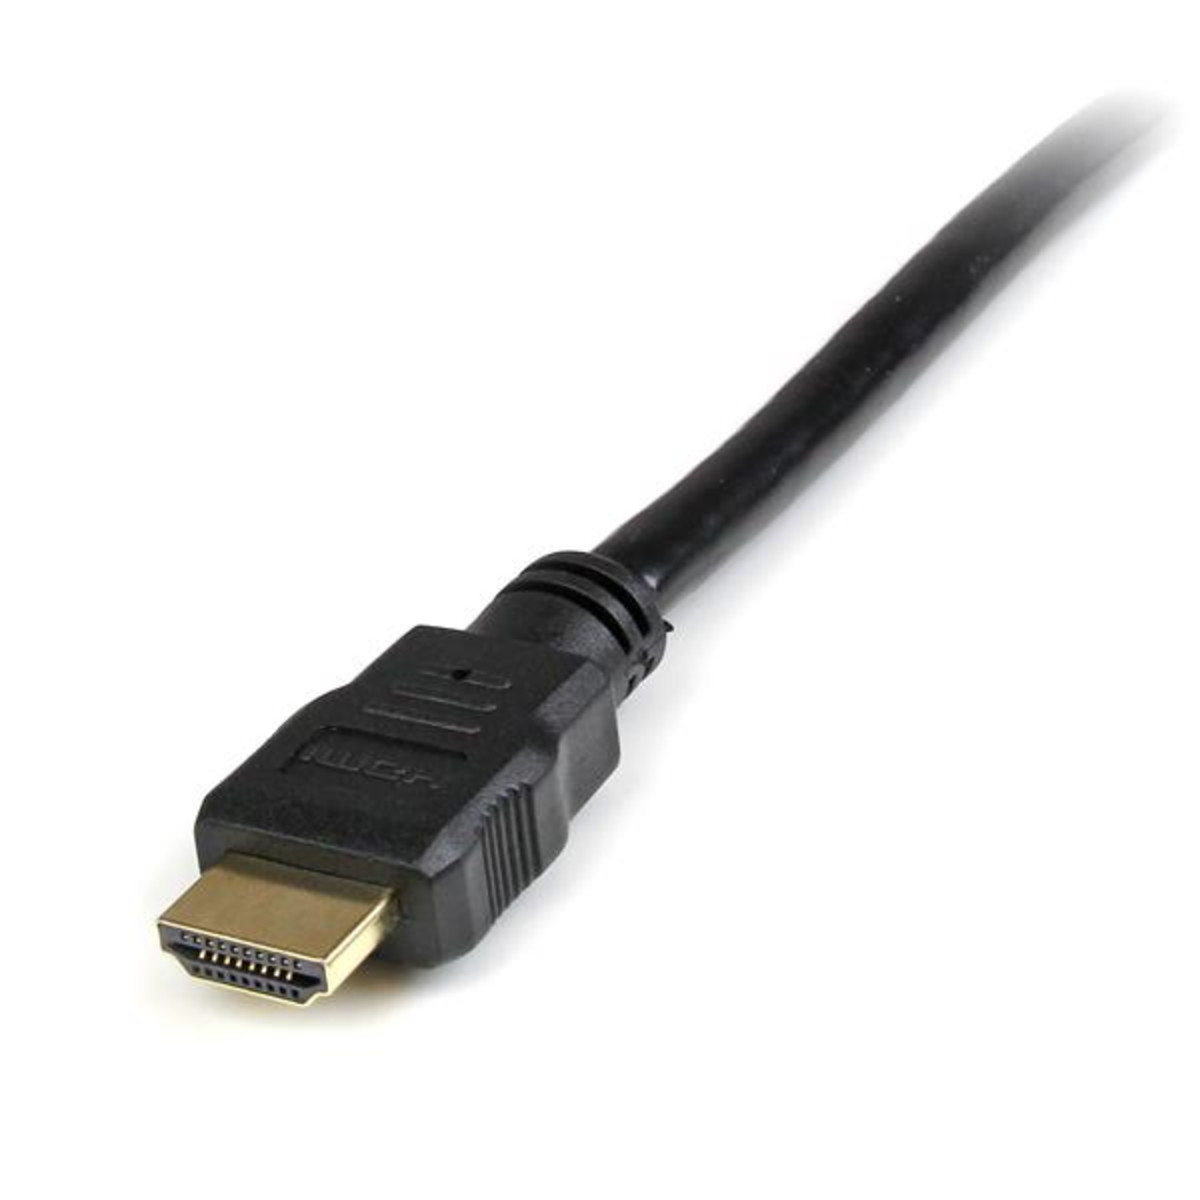 1m HDMI to DVI-D Cable - M/M